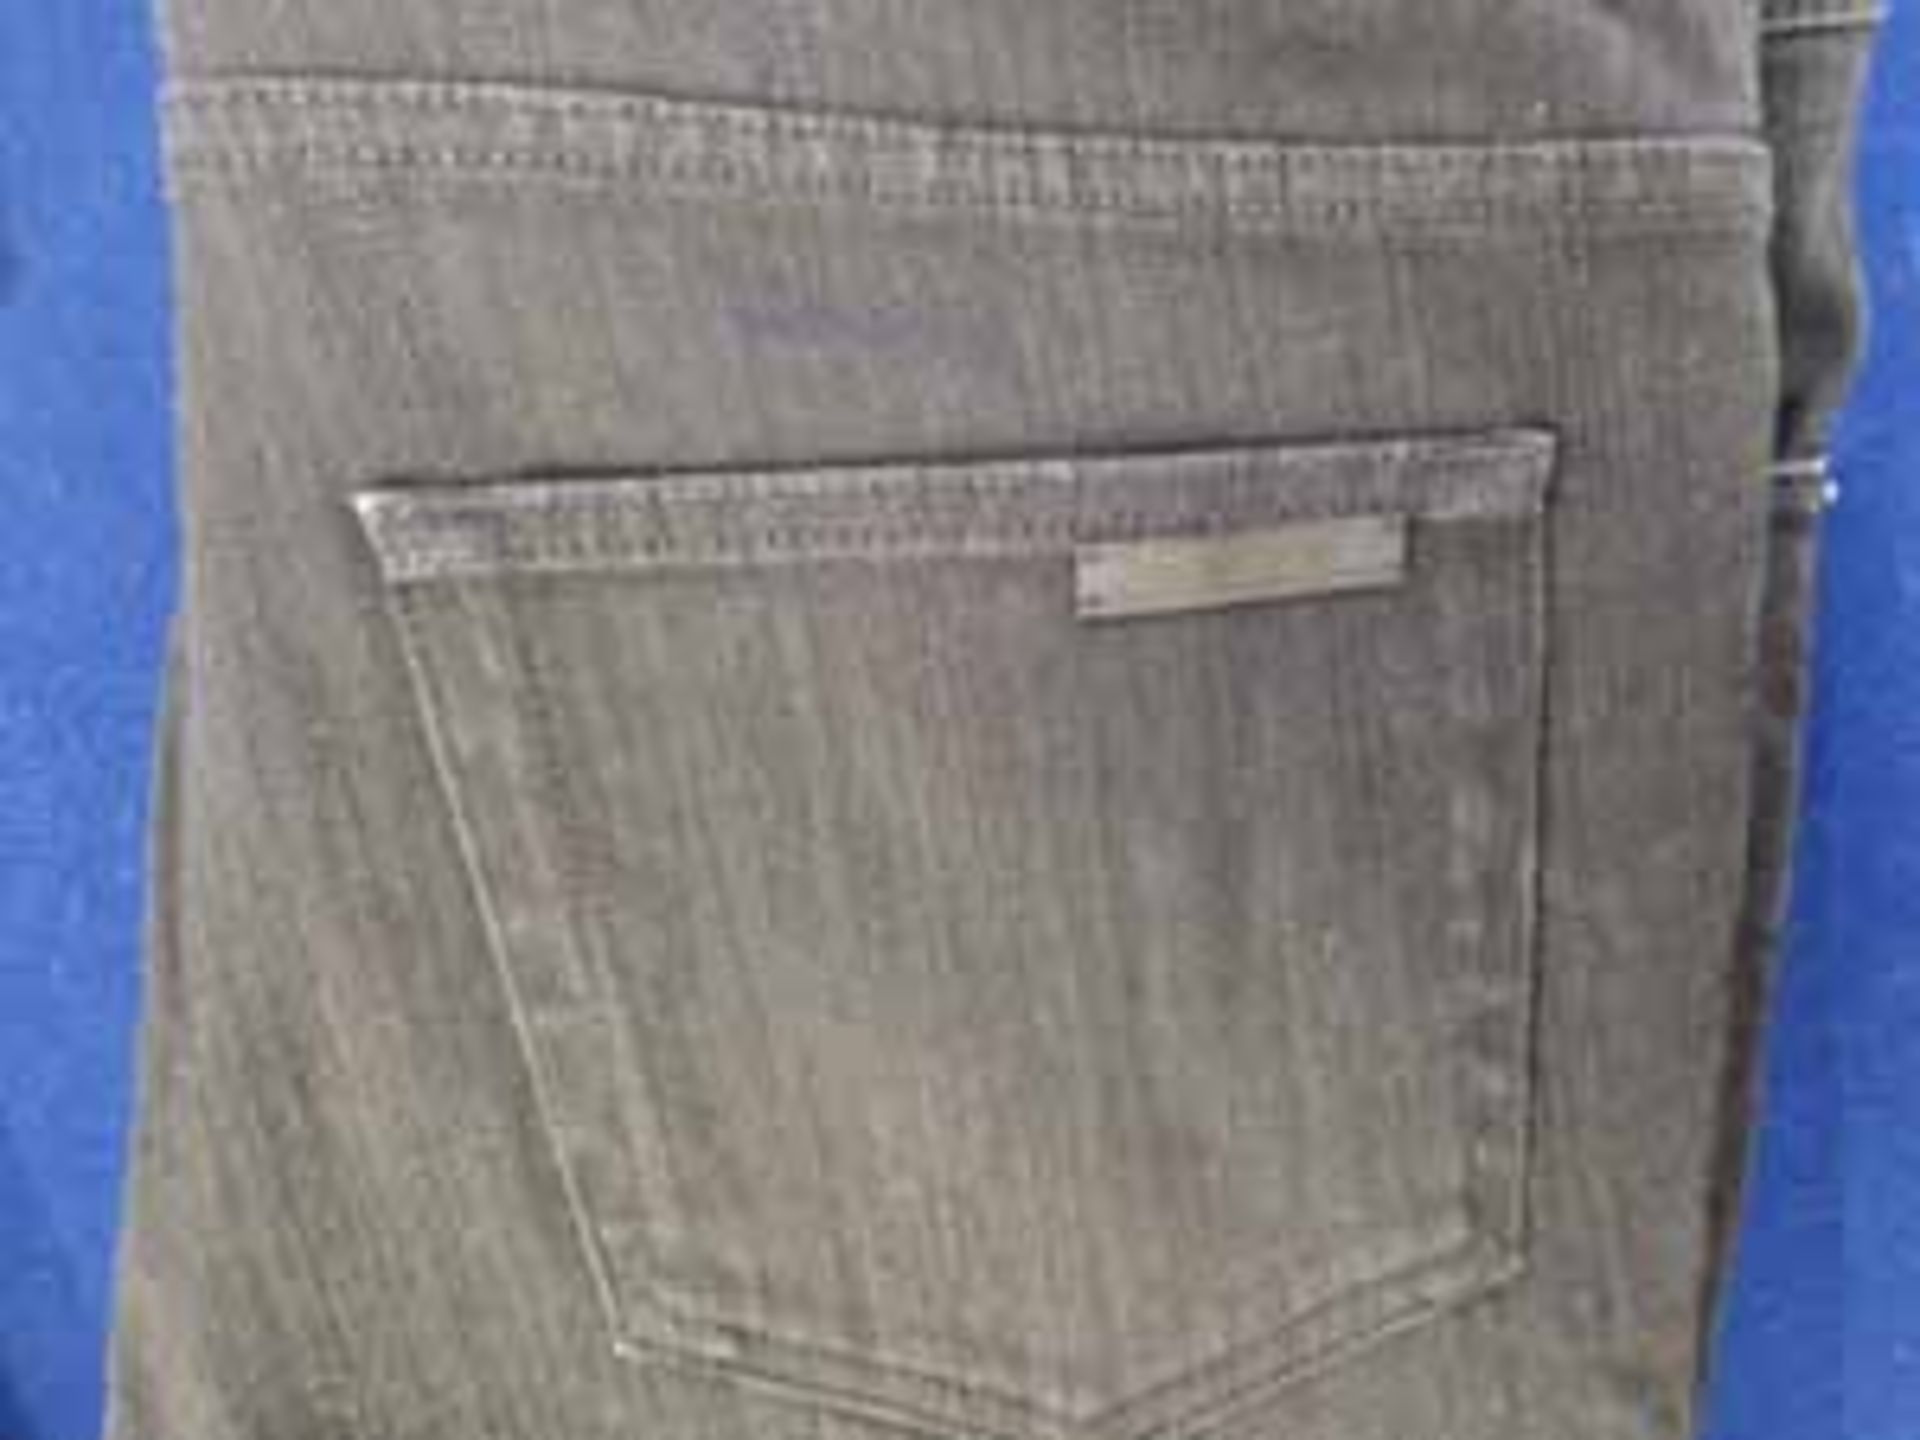 Two Pairs of PRADA Men's Jeans:- - Denim 5-Pocket Jeans in Black Raw Finish and Tonal Stitching, - Image 2 of 4